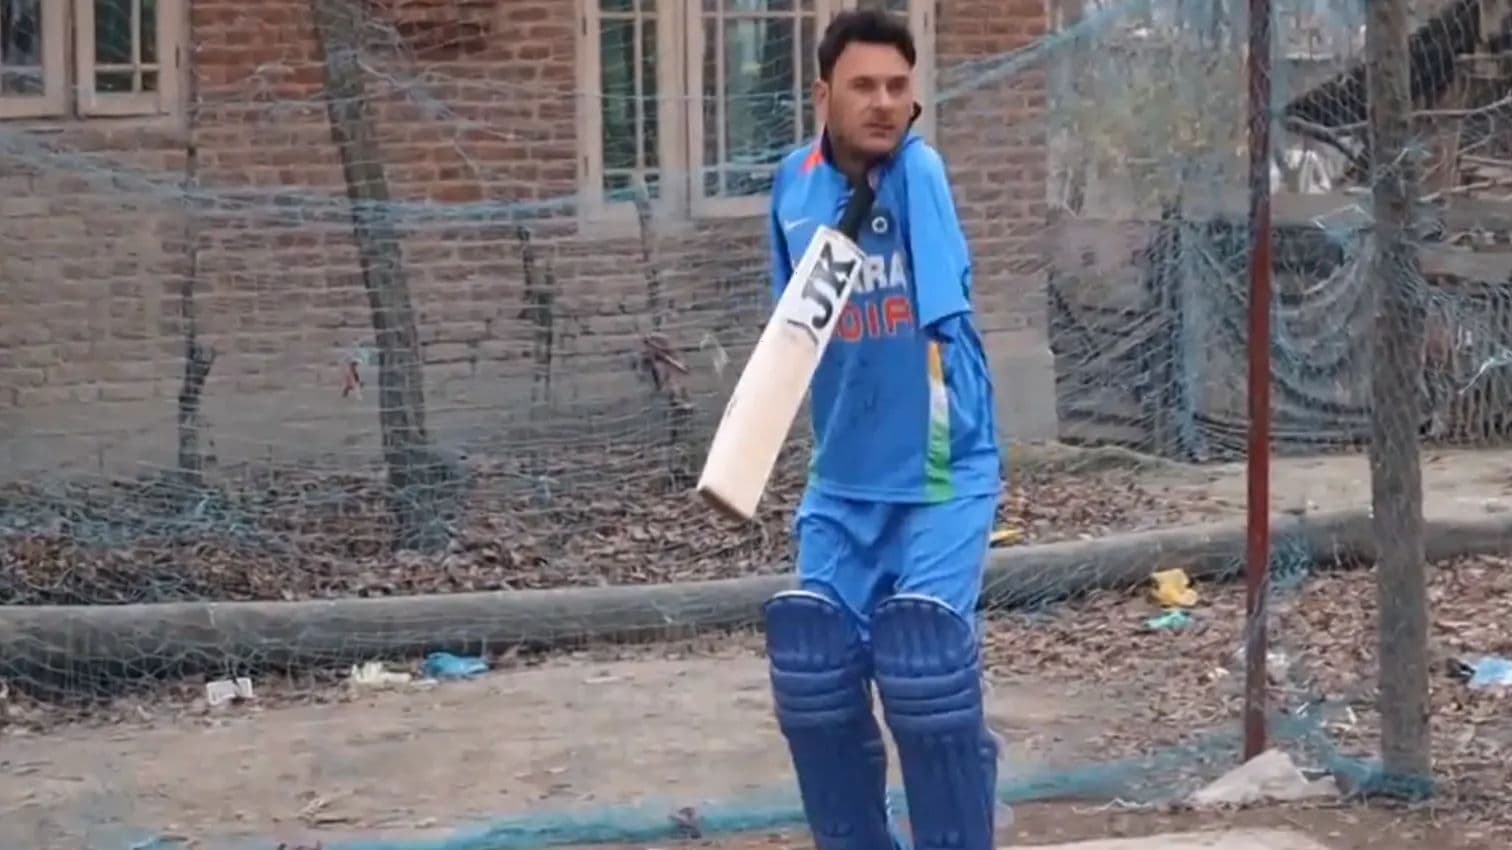 34-year-old differently-abled cricketer Amir Hussain Lone